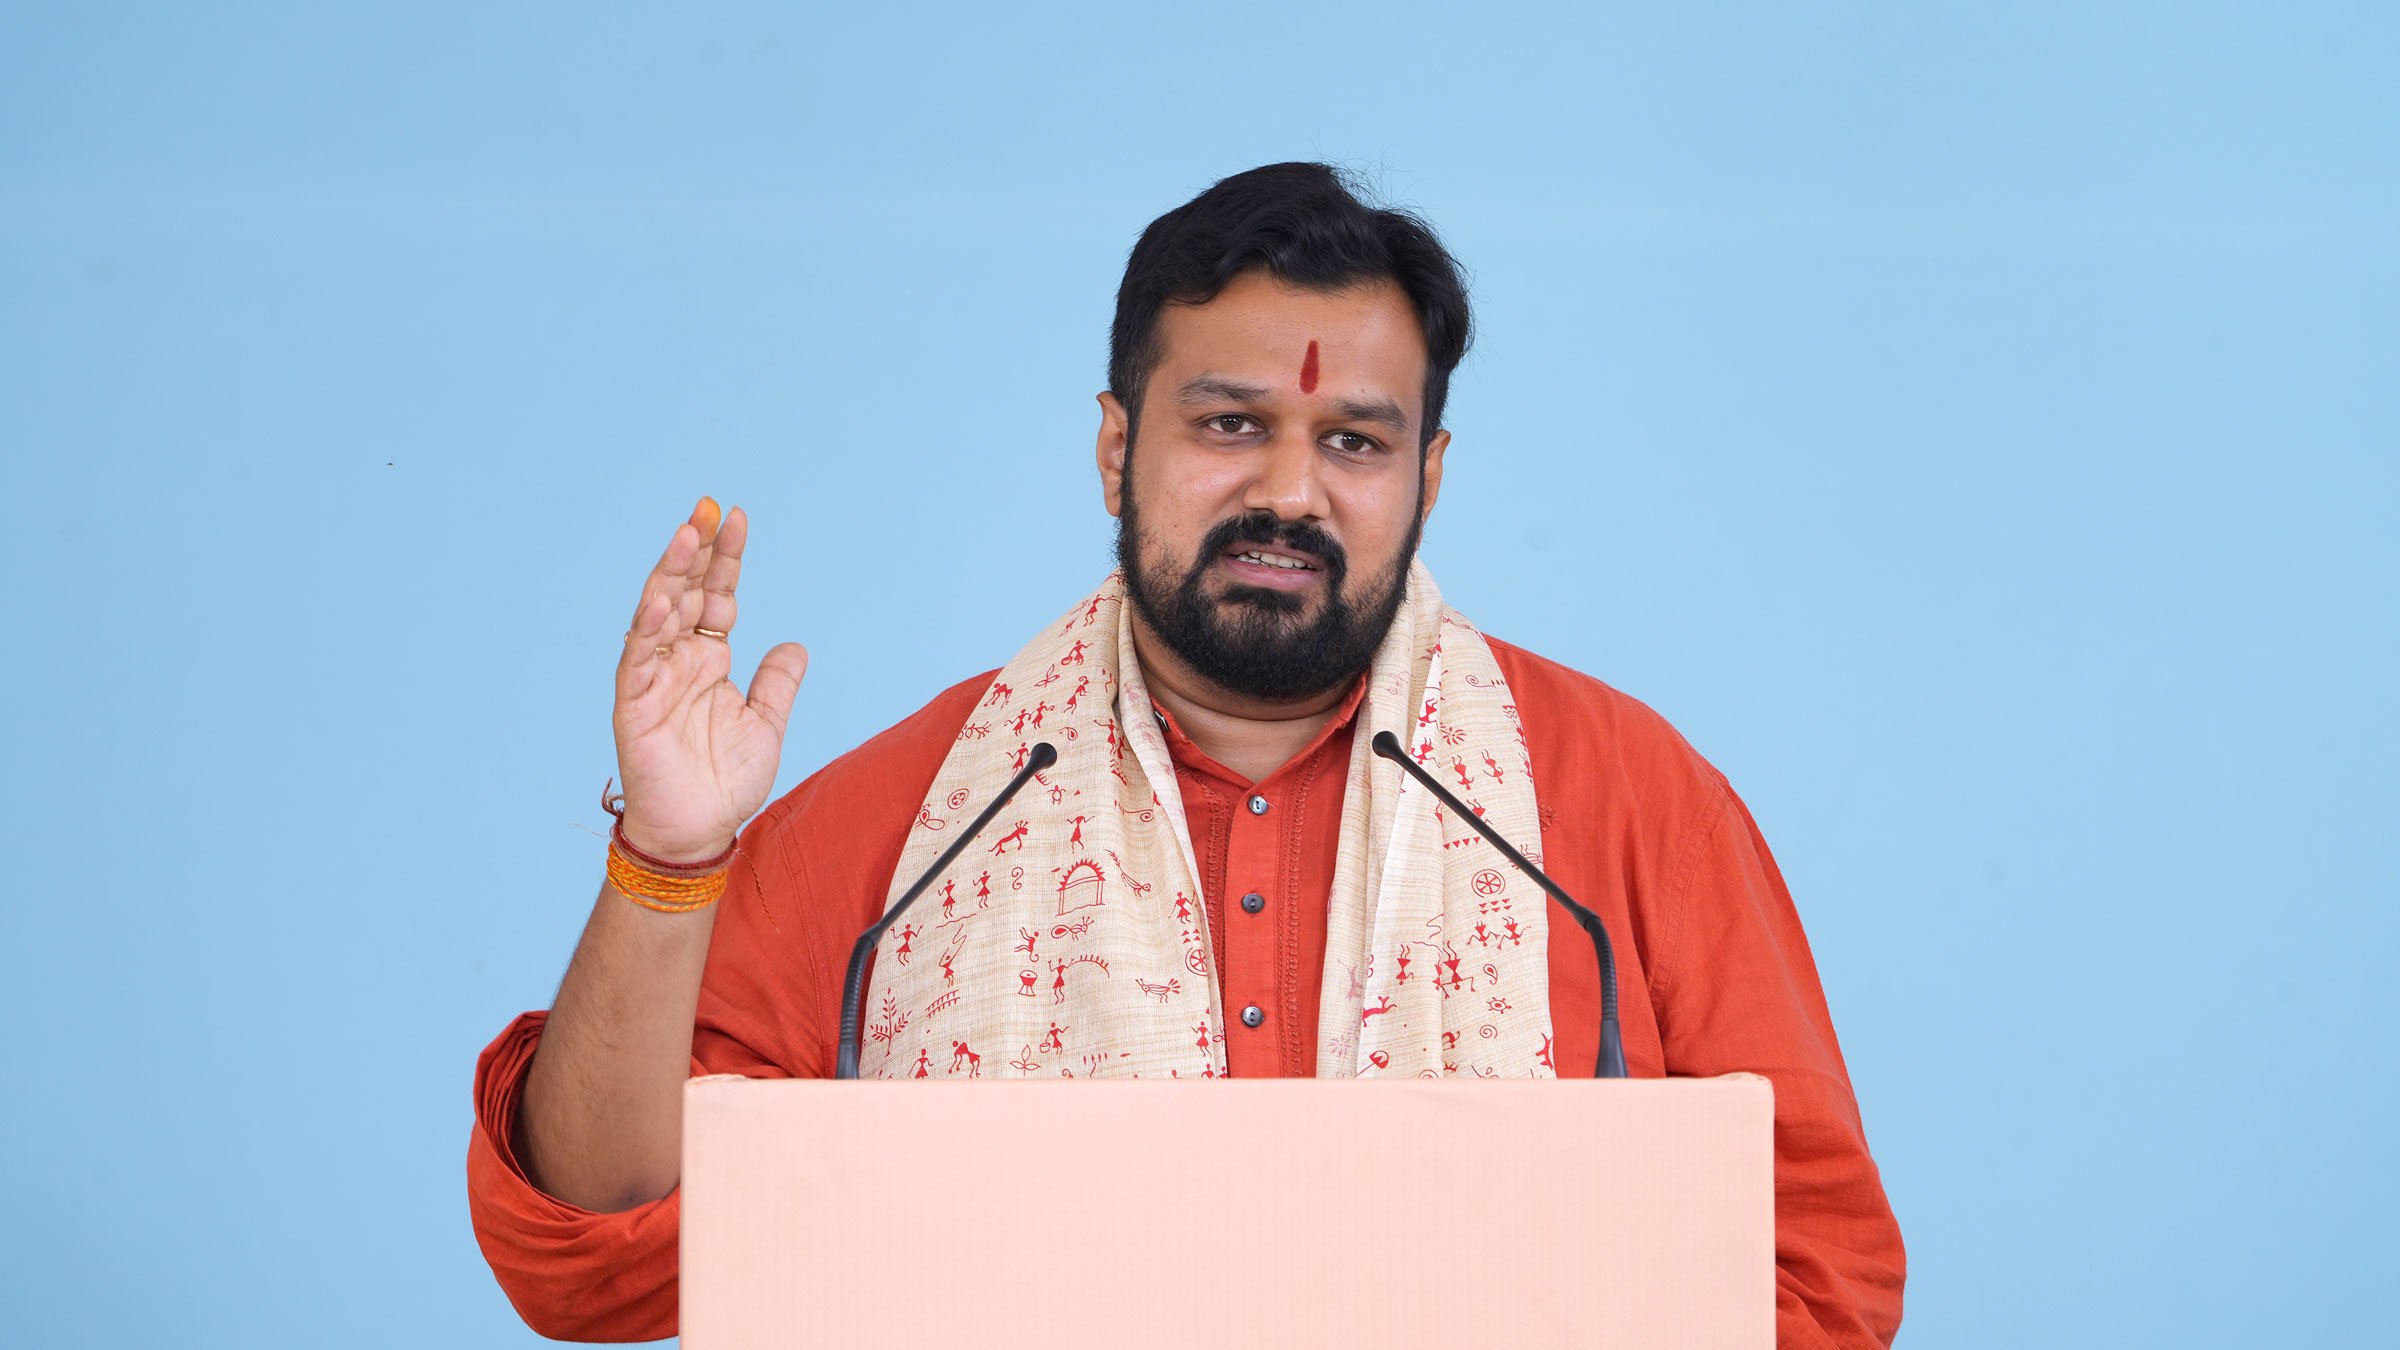 Adv. Vishnu Shankar Jain (Spokesperson, Hindu Front For Justice and Advocate, Supreme Court, Delhi) talking about the struggle to liberate the temples at Kashi, Mathura and Kishkindha. He said, ''Only when Kashi-Vishweshwar is liberated, our Nation will become an undivided ‘Hindu Rashtra’'.